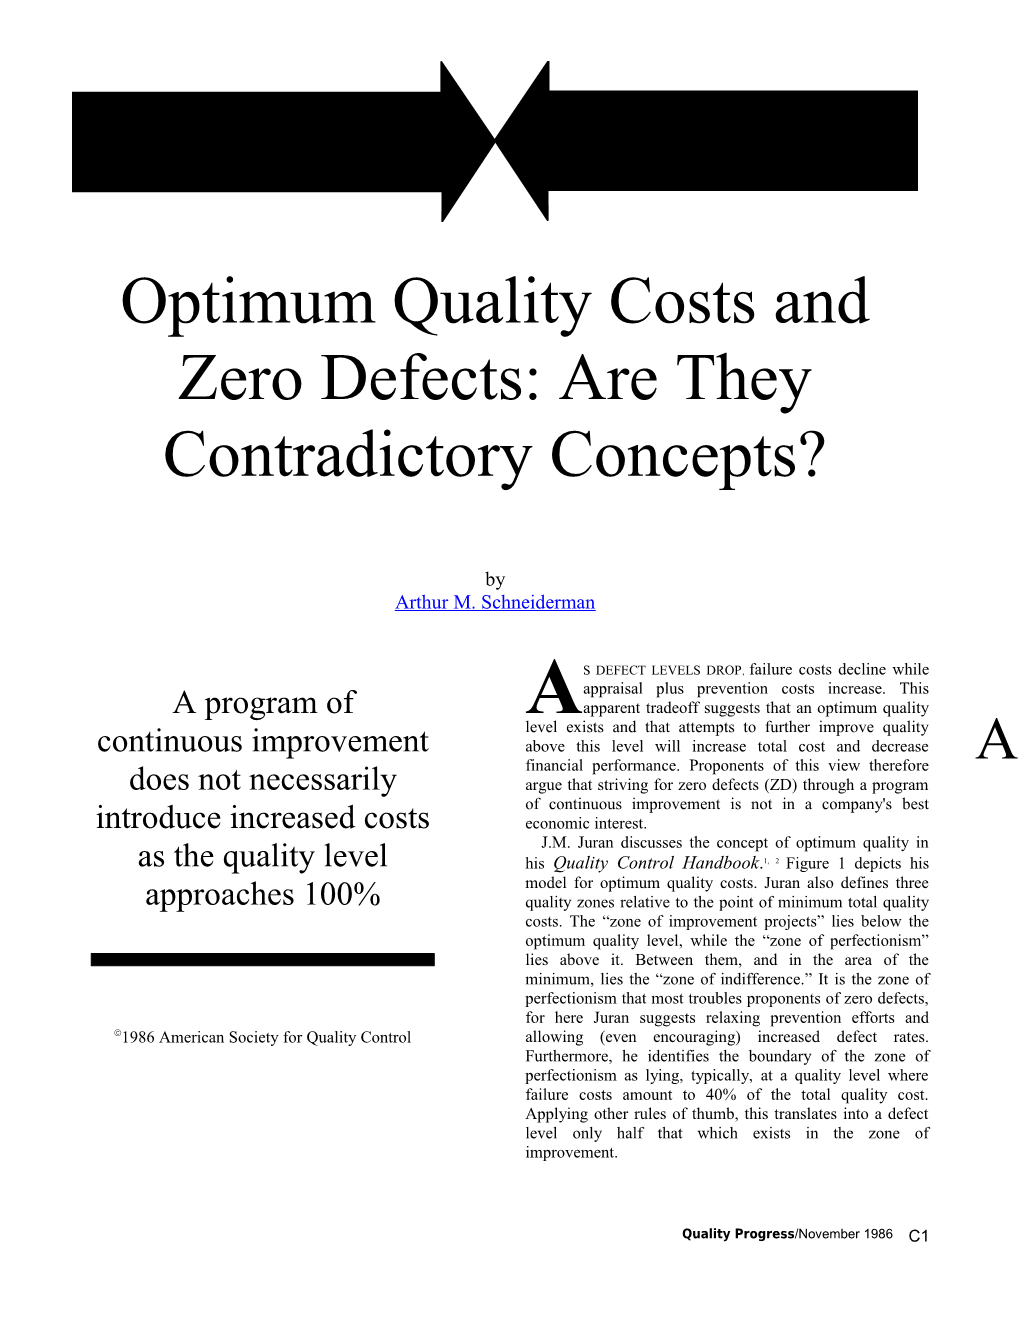 Optimum Quality Costs And Zero Defects: Are They Contradictory Concepts?